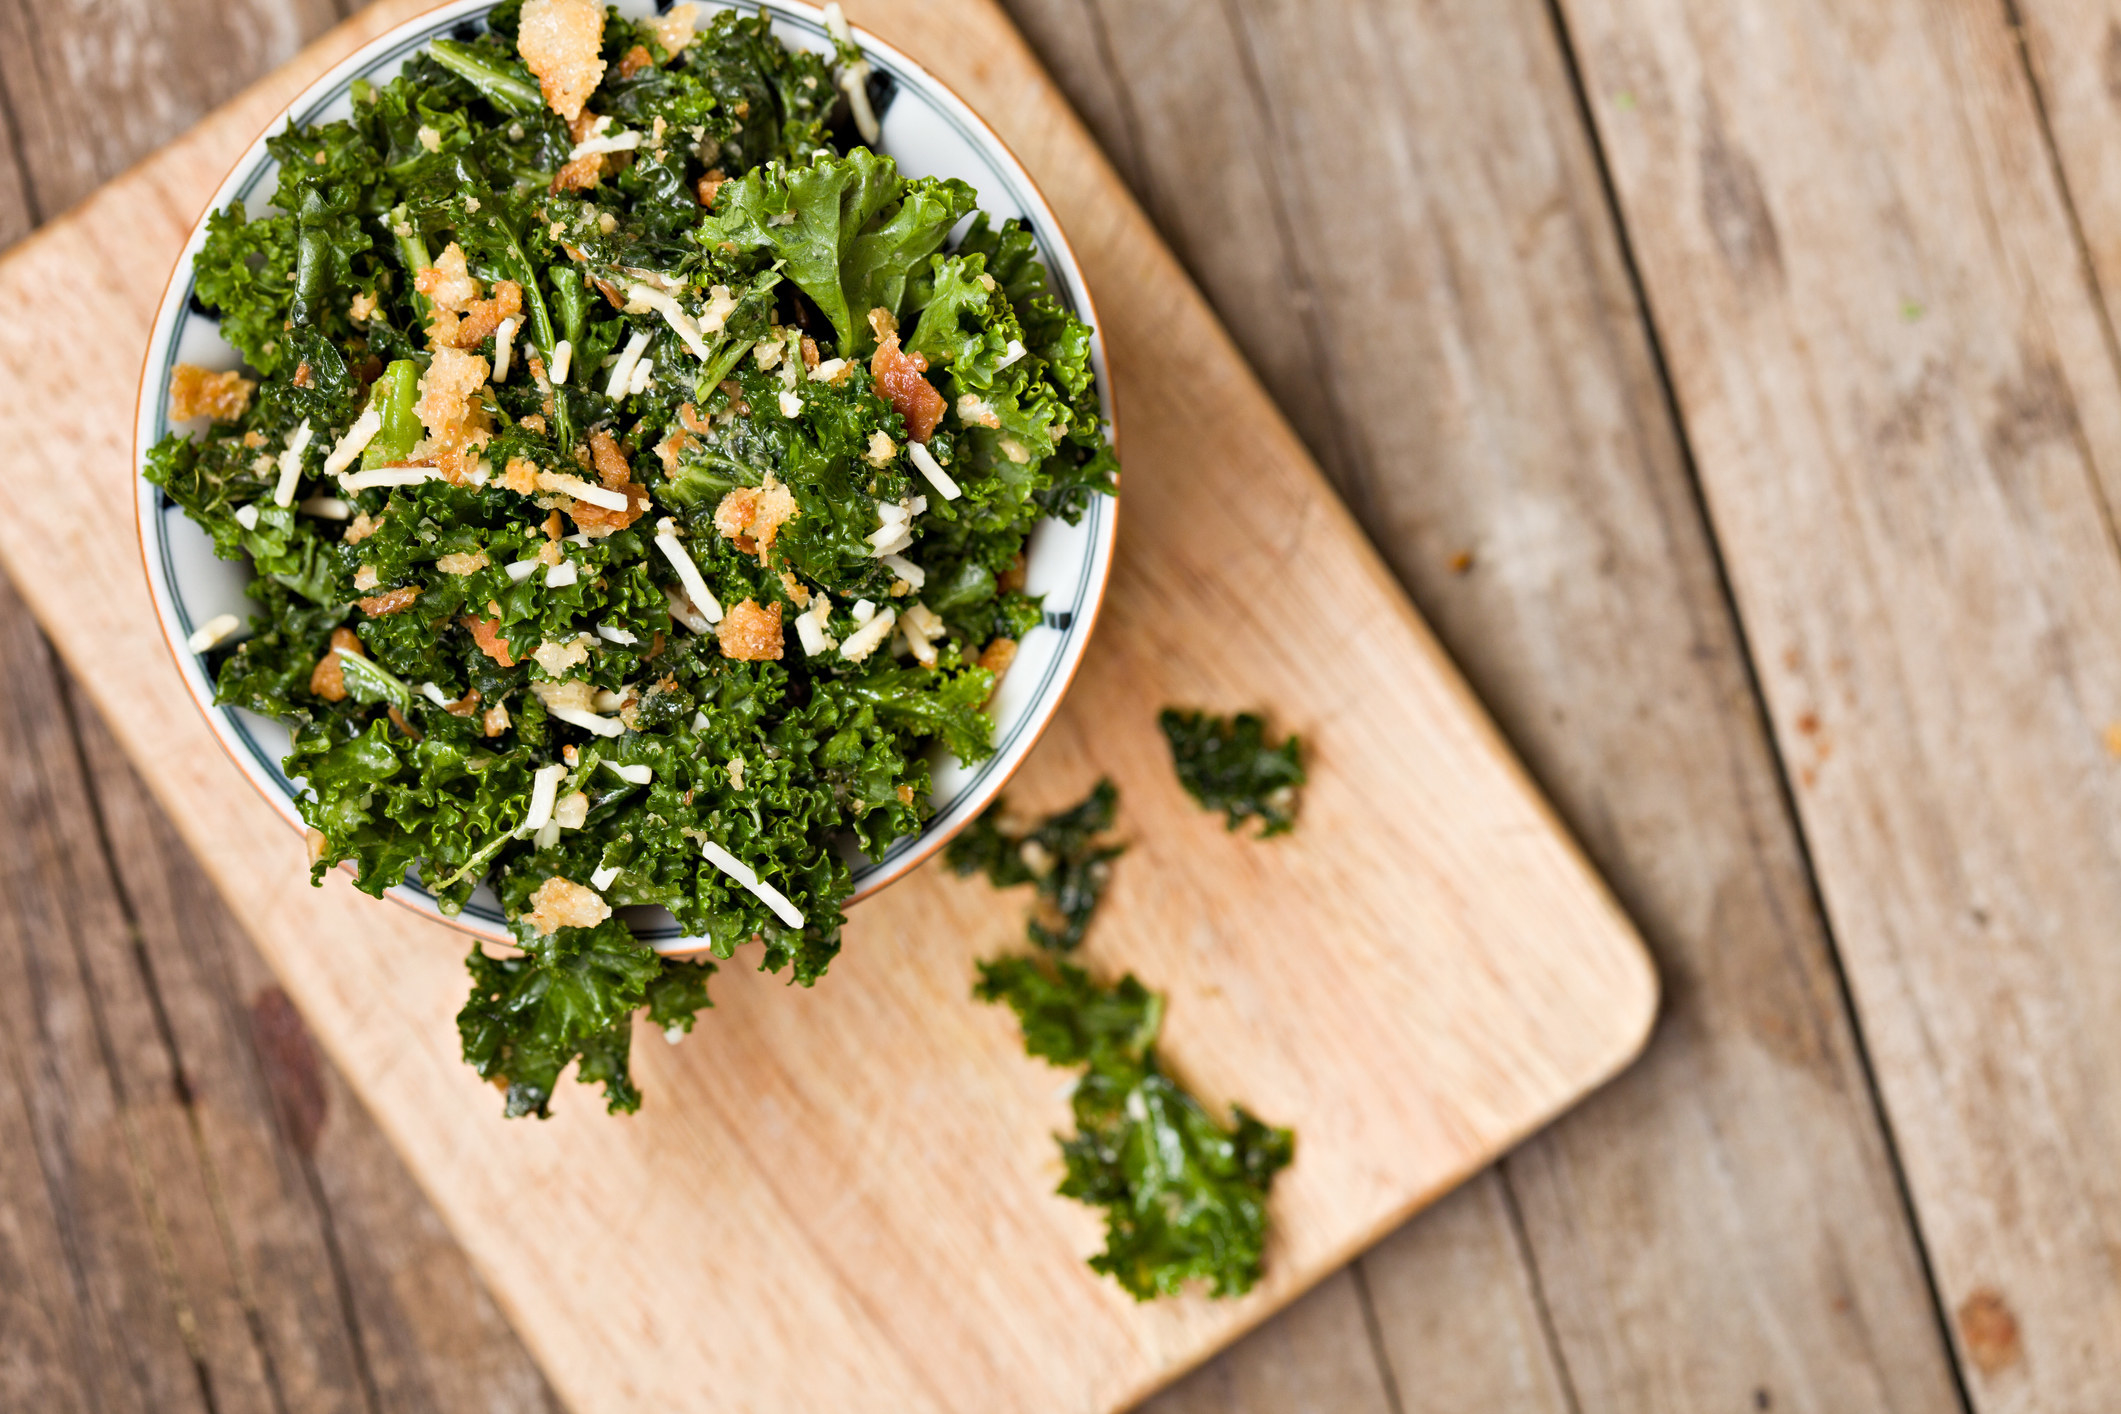 A bowl of kale salad on a cutting board